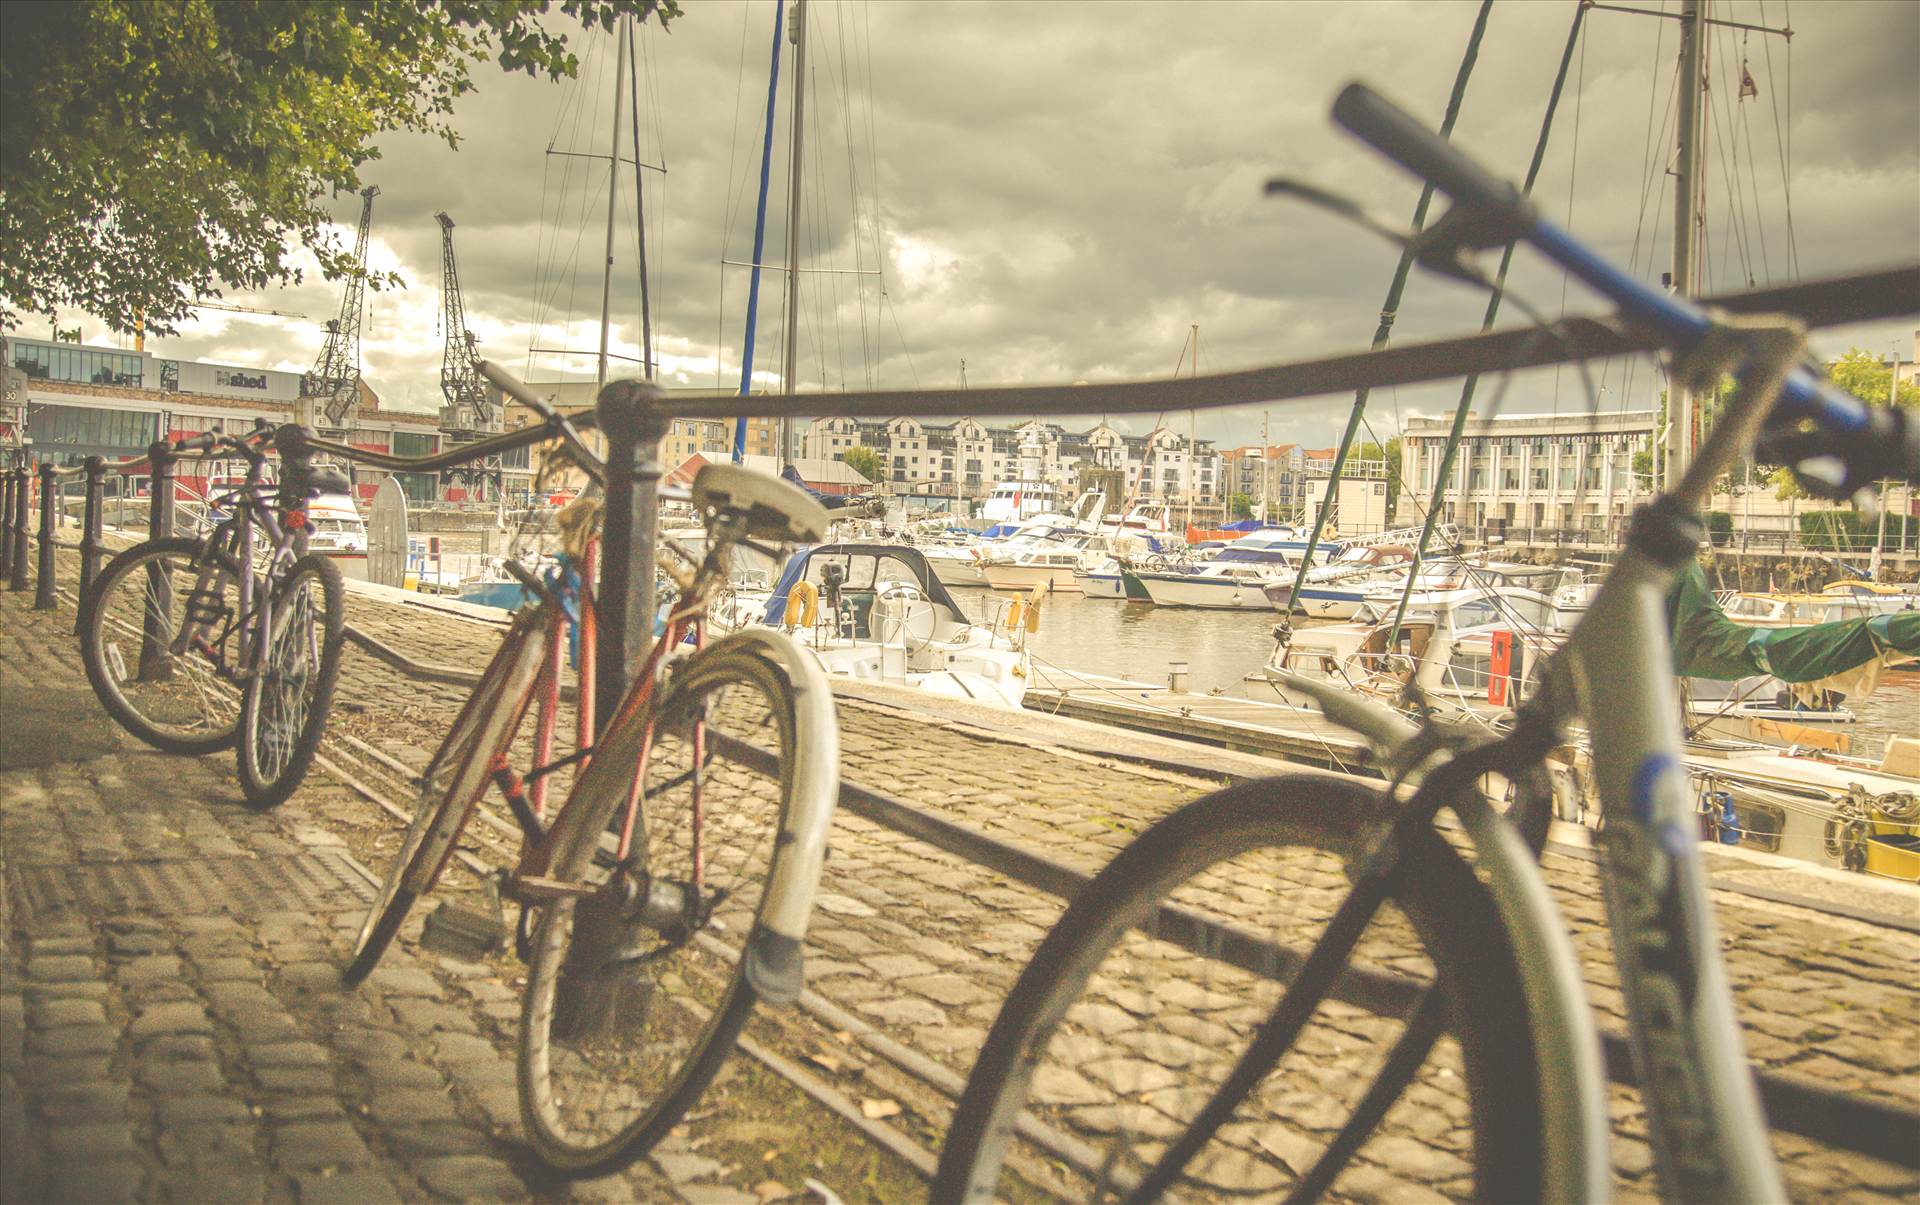 Bicycles at Harbourside 3.jpg  by WPC-187